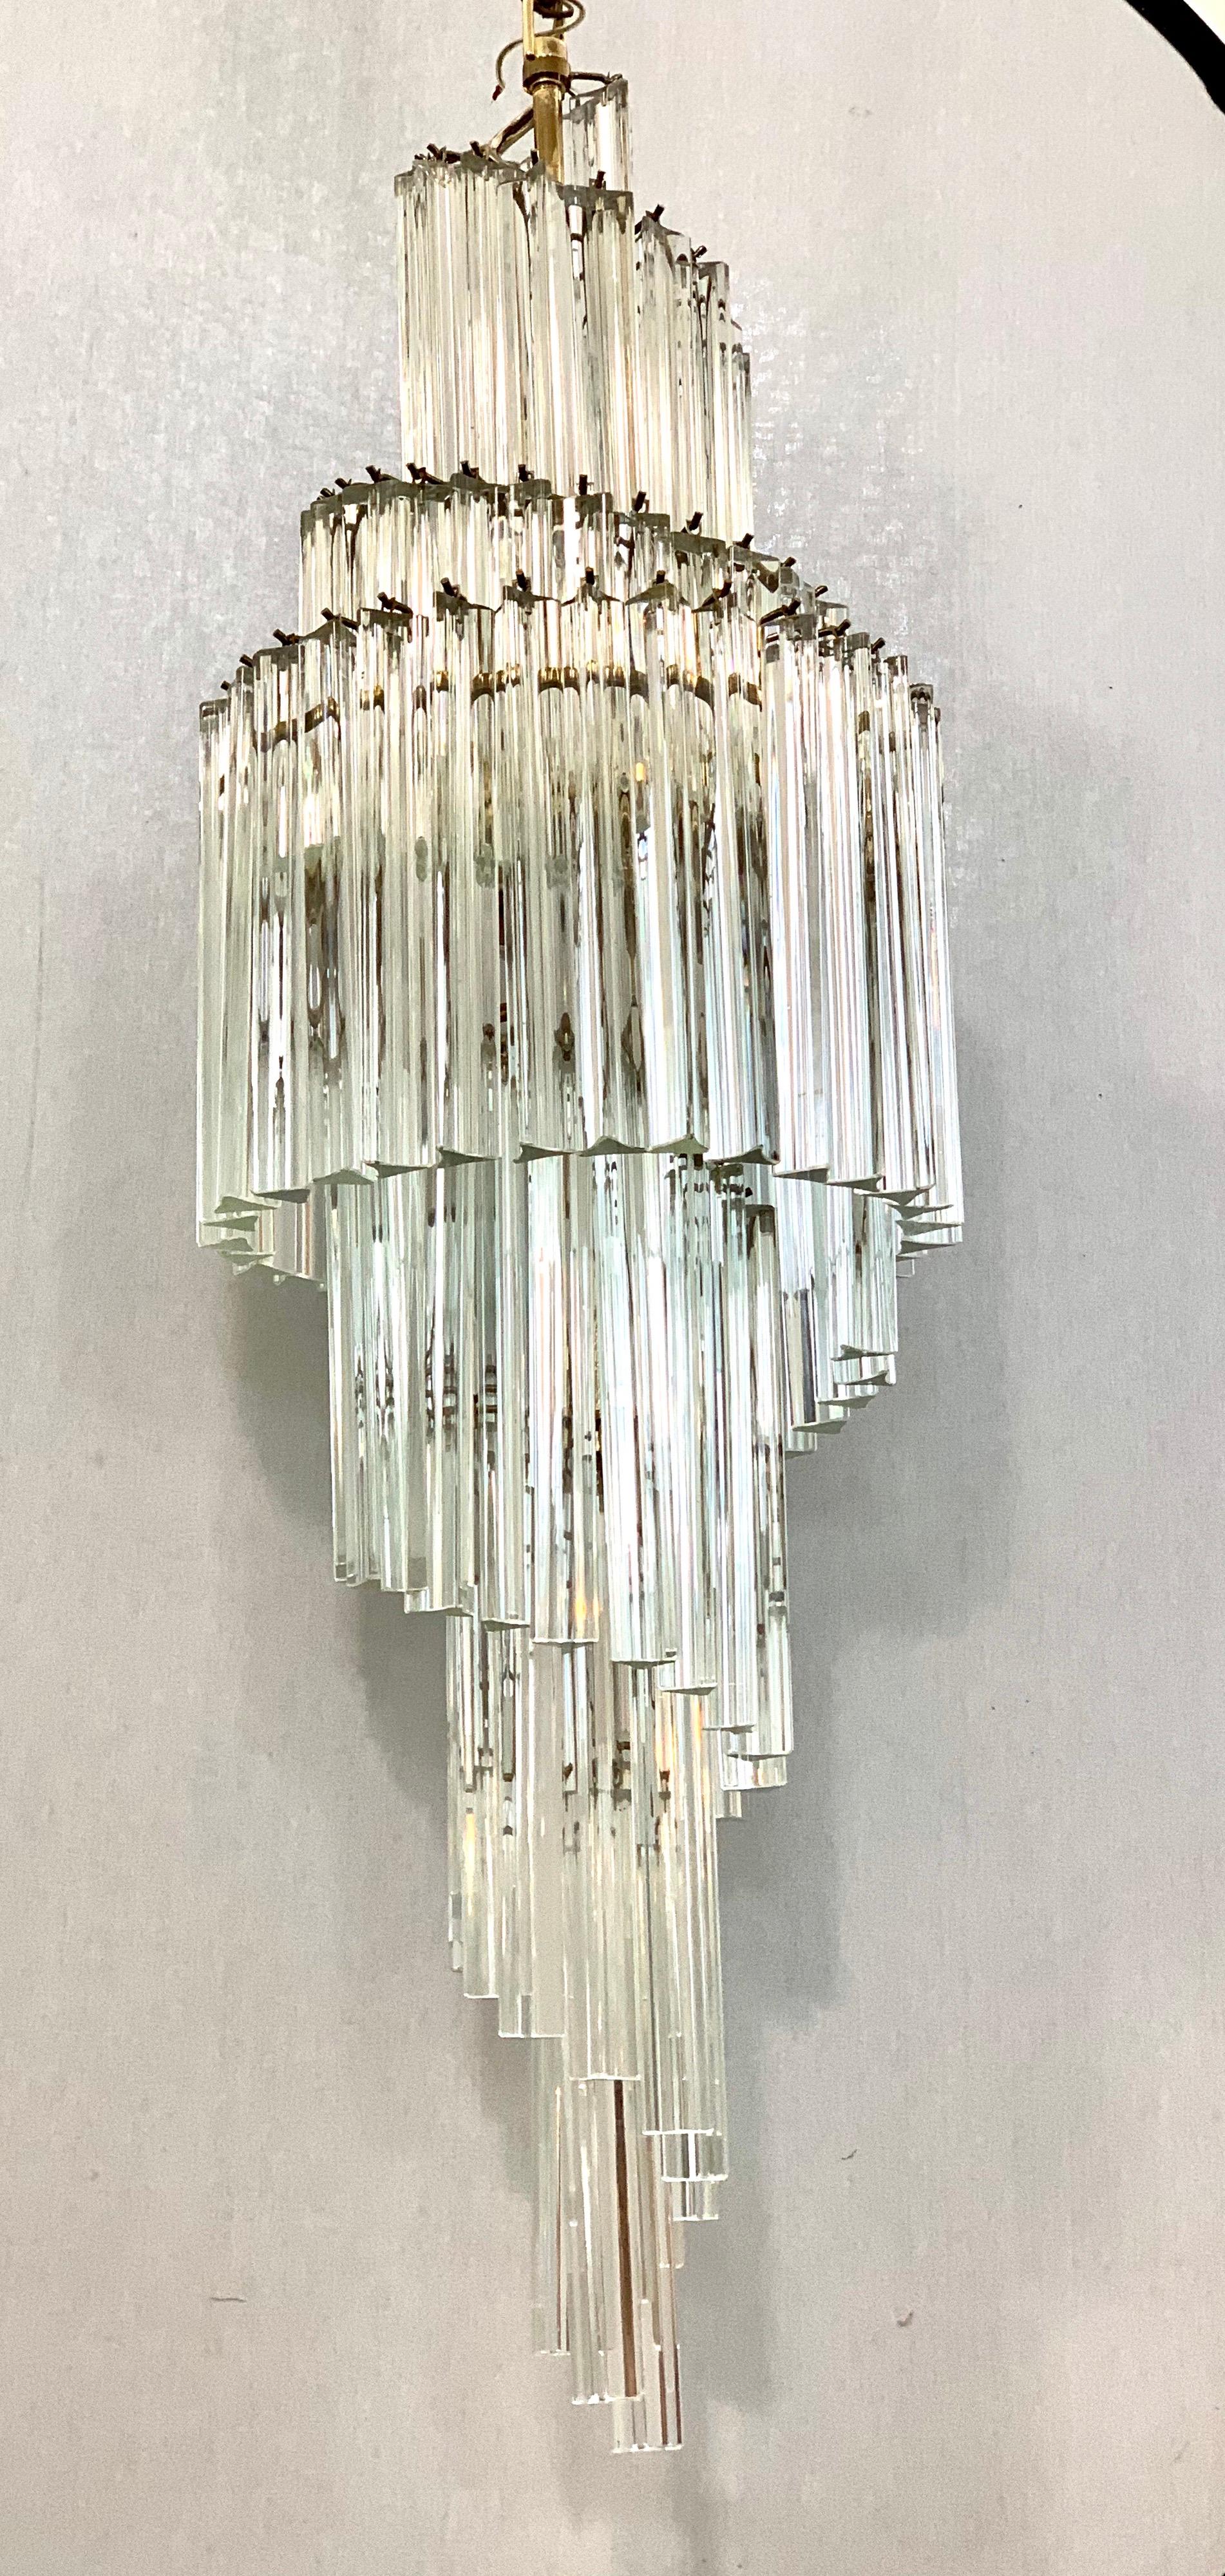 Magnificent, cascading Camer glass waterfall chandelier. Iconic mid-century lighting.
Each heavy Camer glass prism hangs down from its own individual hook on the steel
frame. Wired for USA and in perfect working order. Now, more than ever, home is